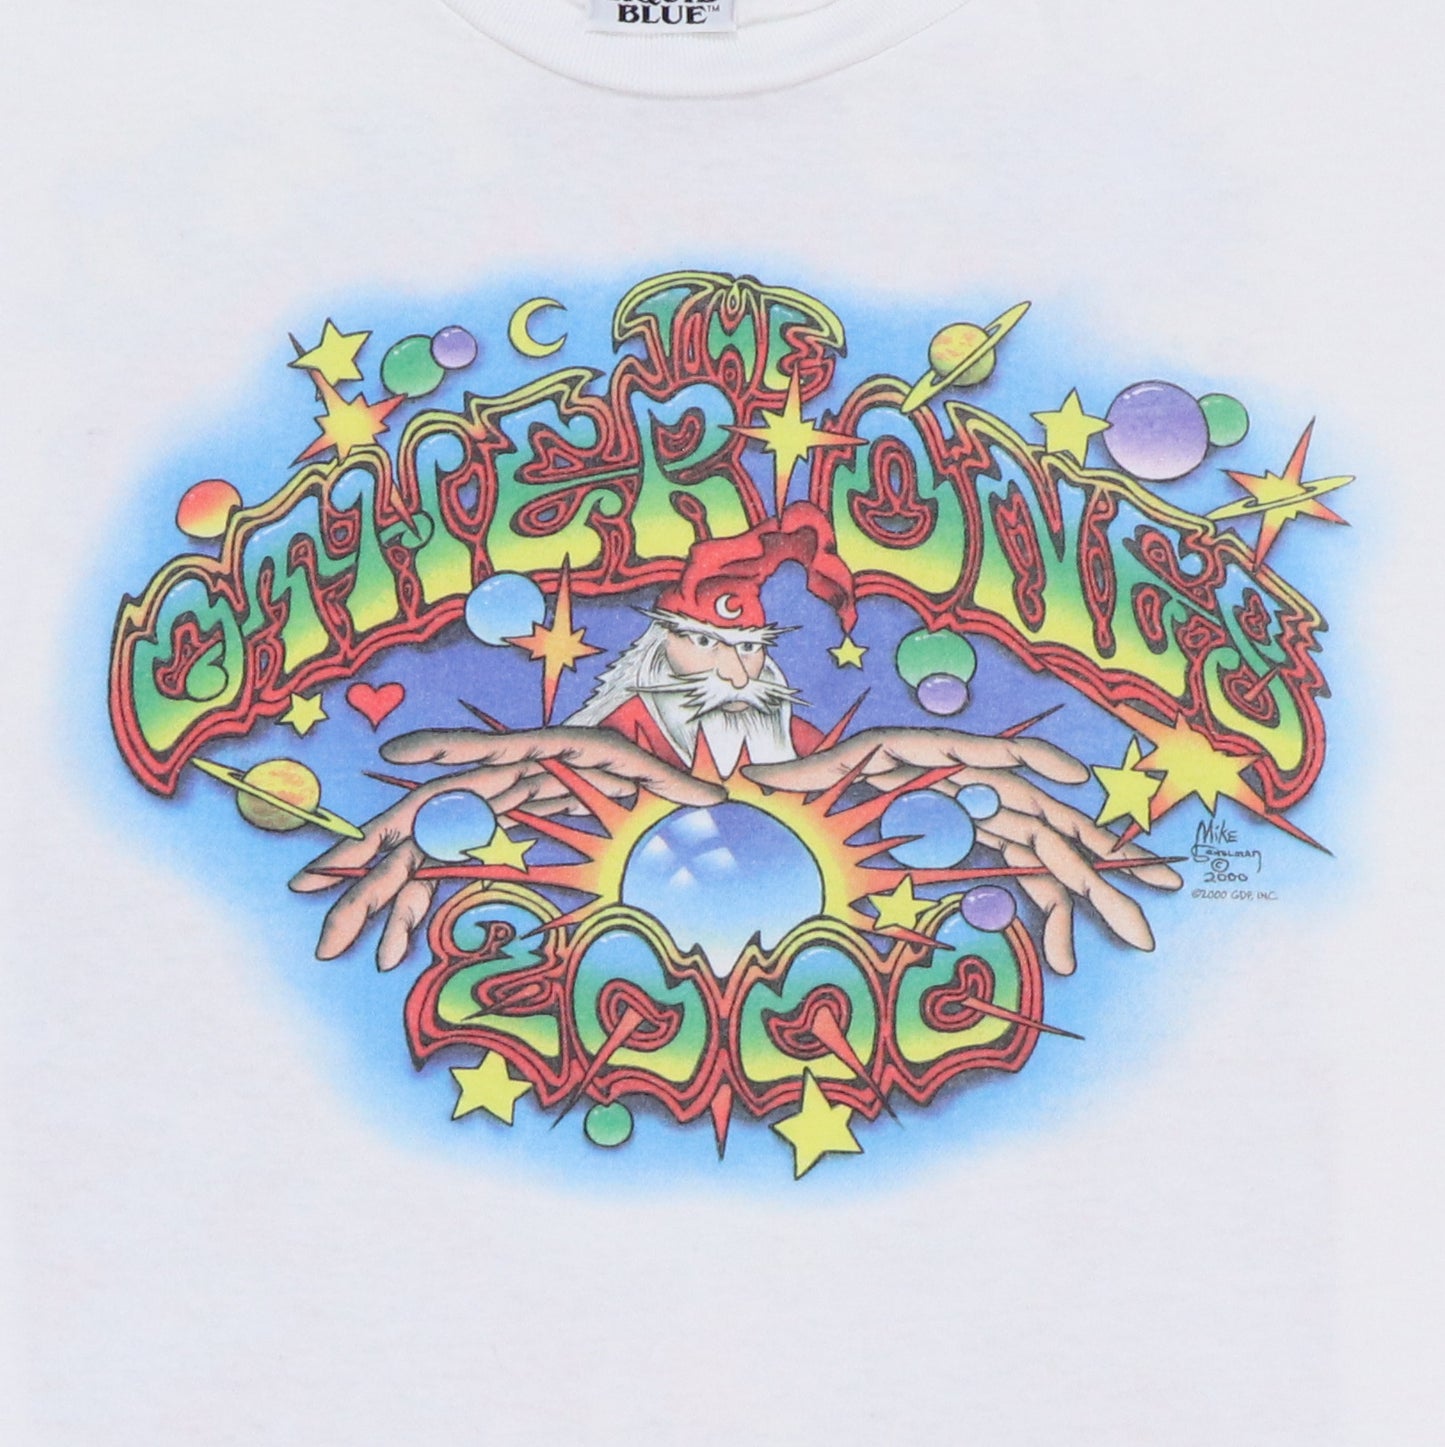 2000 The Other Ones Tour Shirt